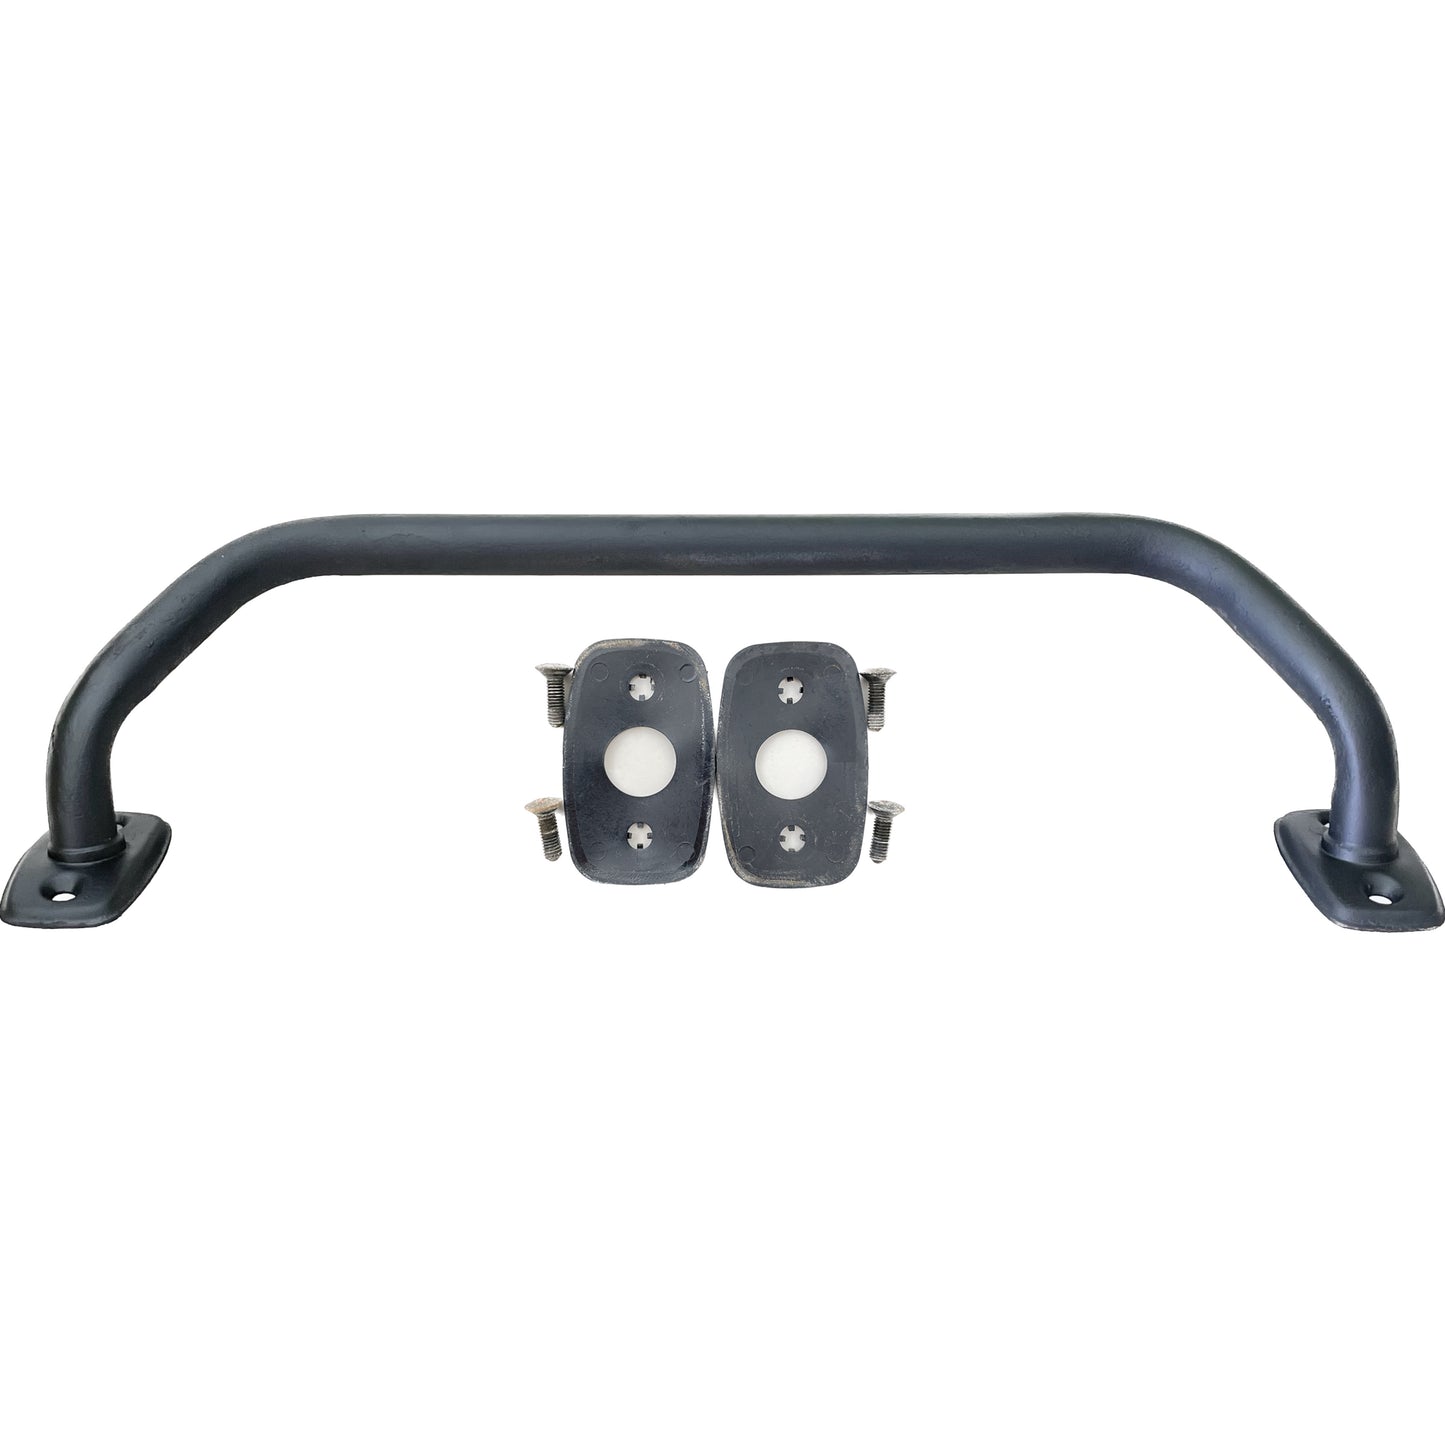 60 Series Handle Bar Assembly